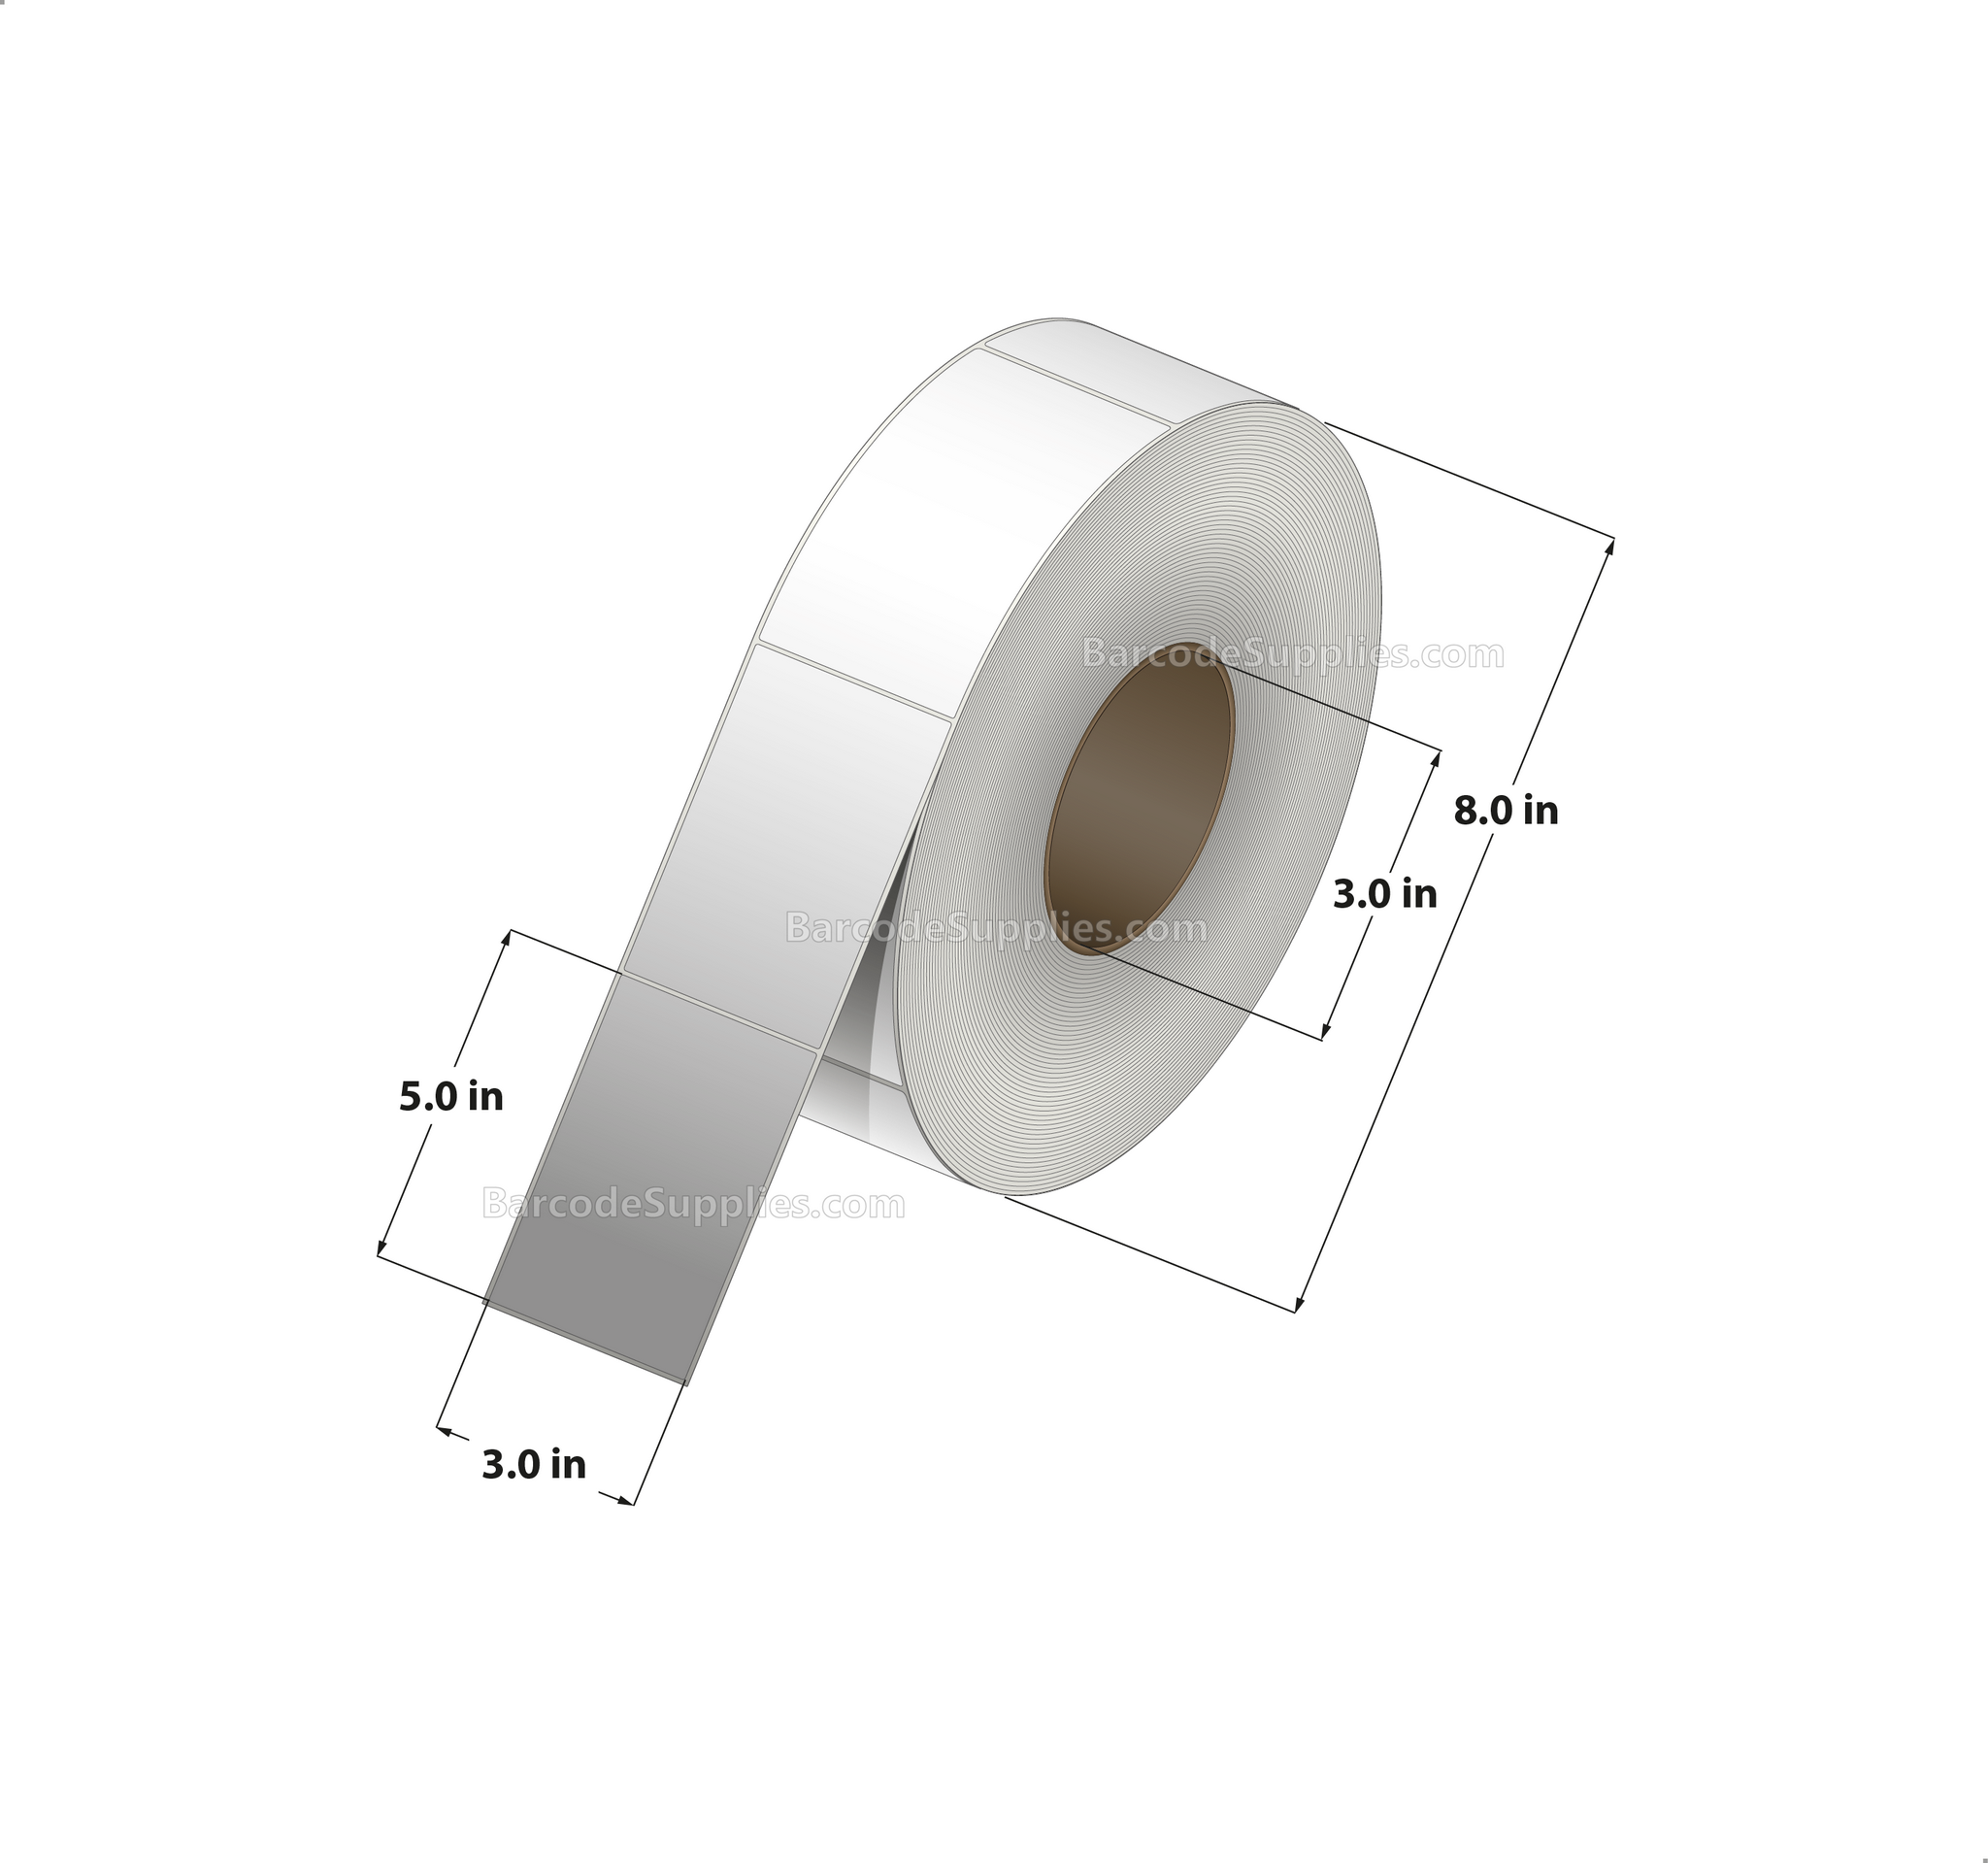 3 x 5 Thermal Transfer White Labels With Permanent Acrylic Adhesive - Not Perforated - 1250 Labels Per Roll - Carton Of 6 Rolls - 7500 Labels Total - MPN: TH35-1